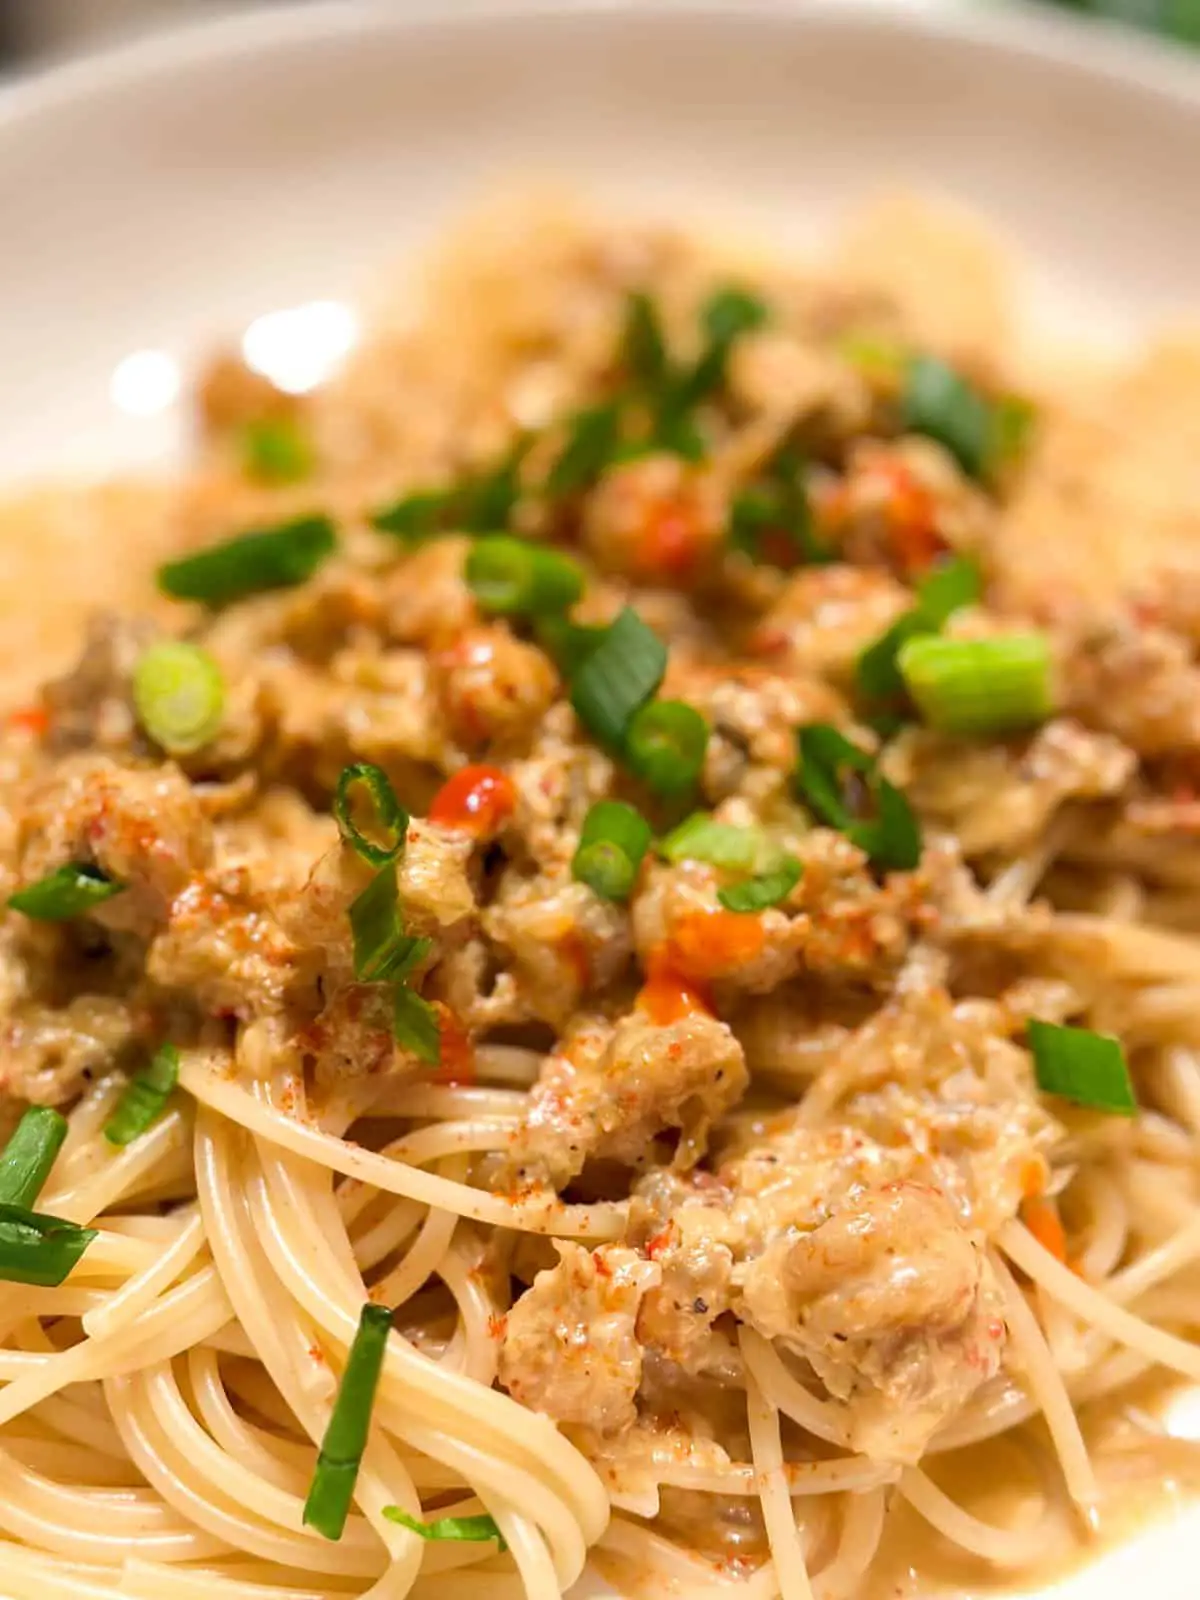 A creamy sauce made with crawfish on top of spaghetti garnished with green onions and drops of Tabasco sauce.